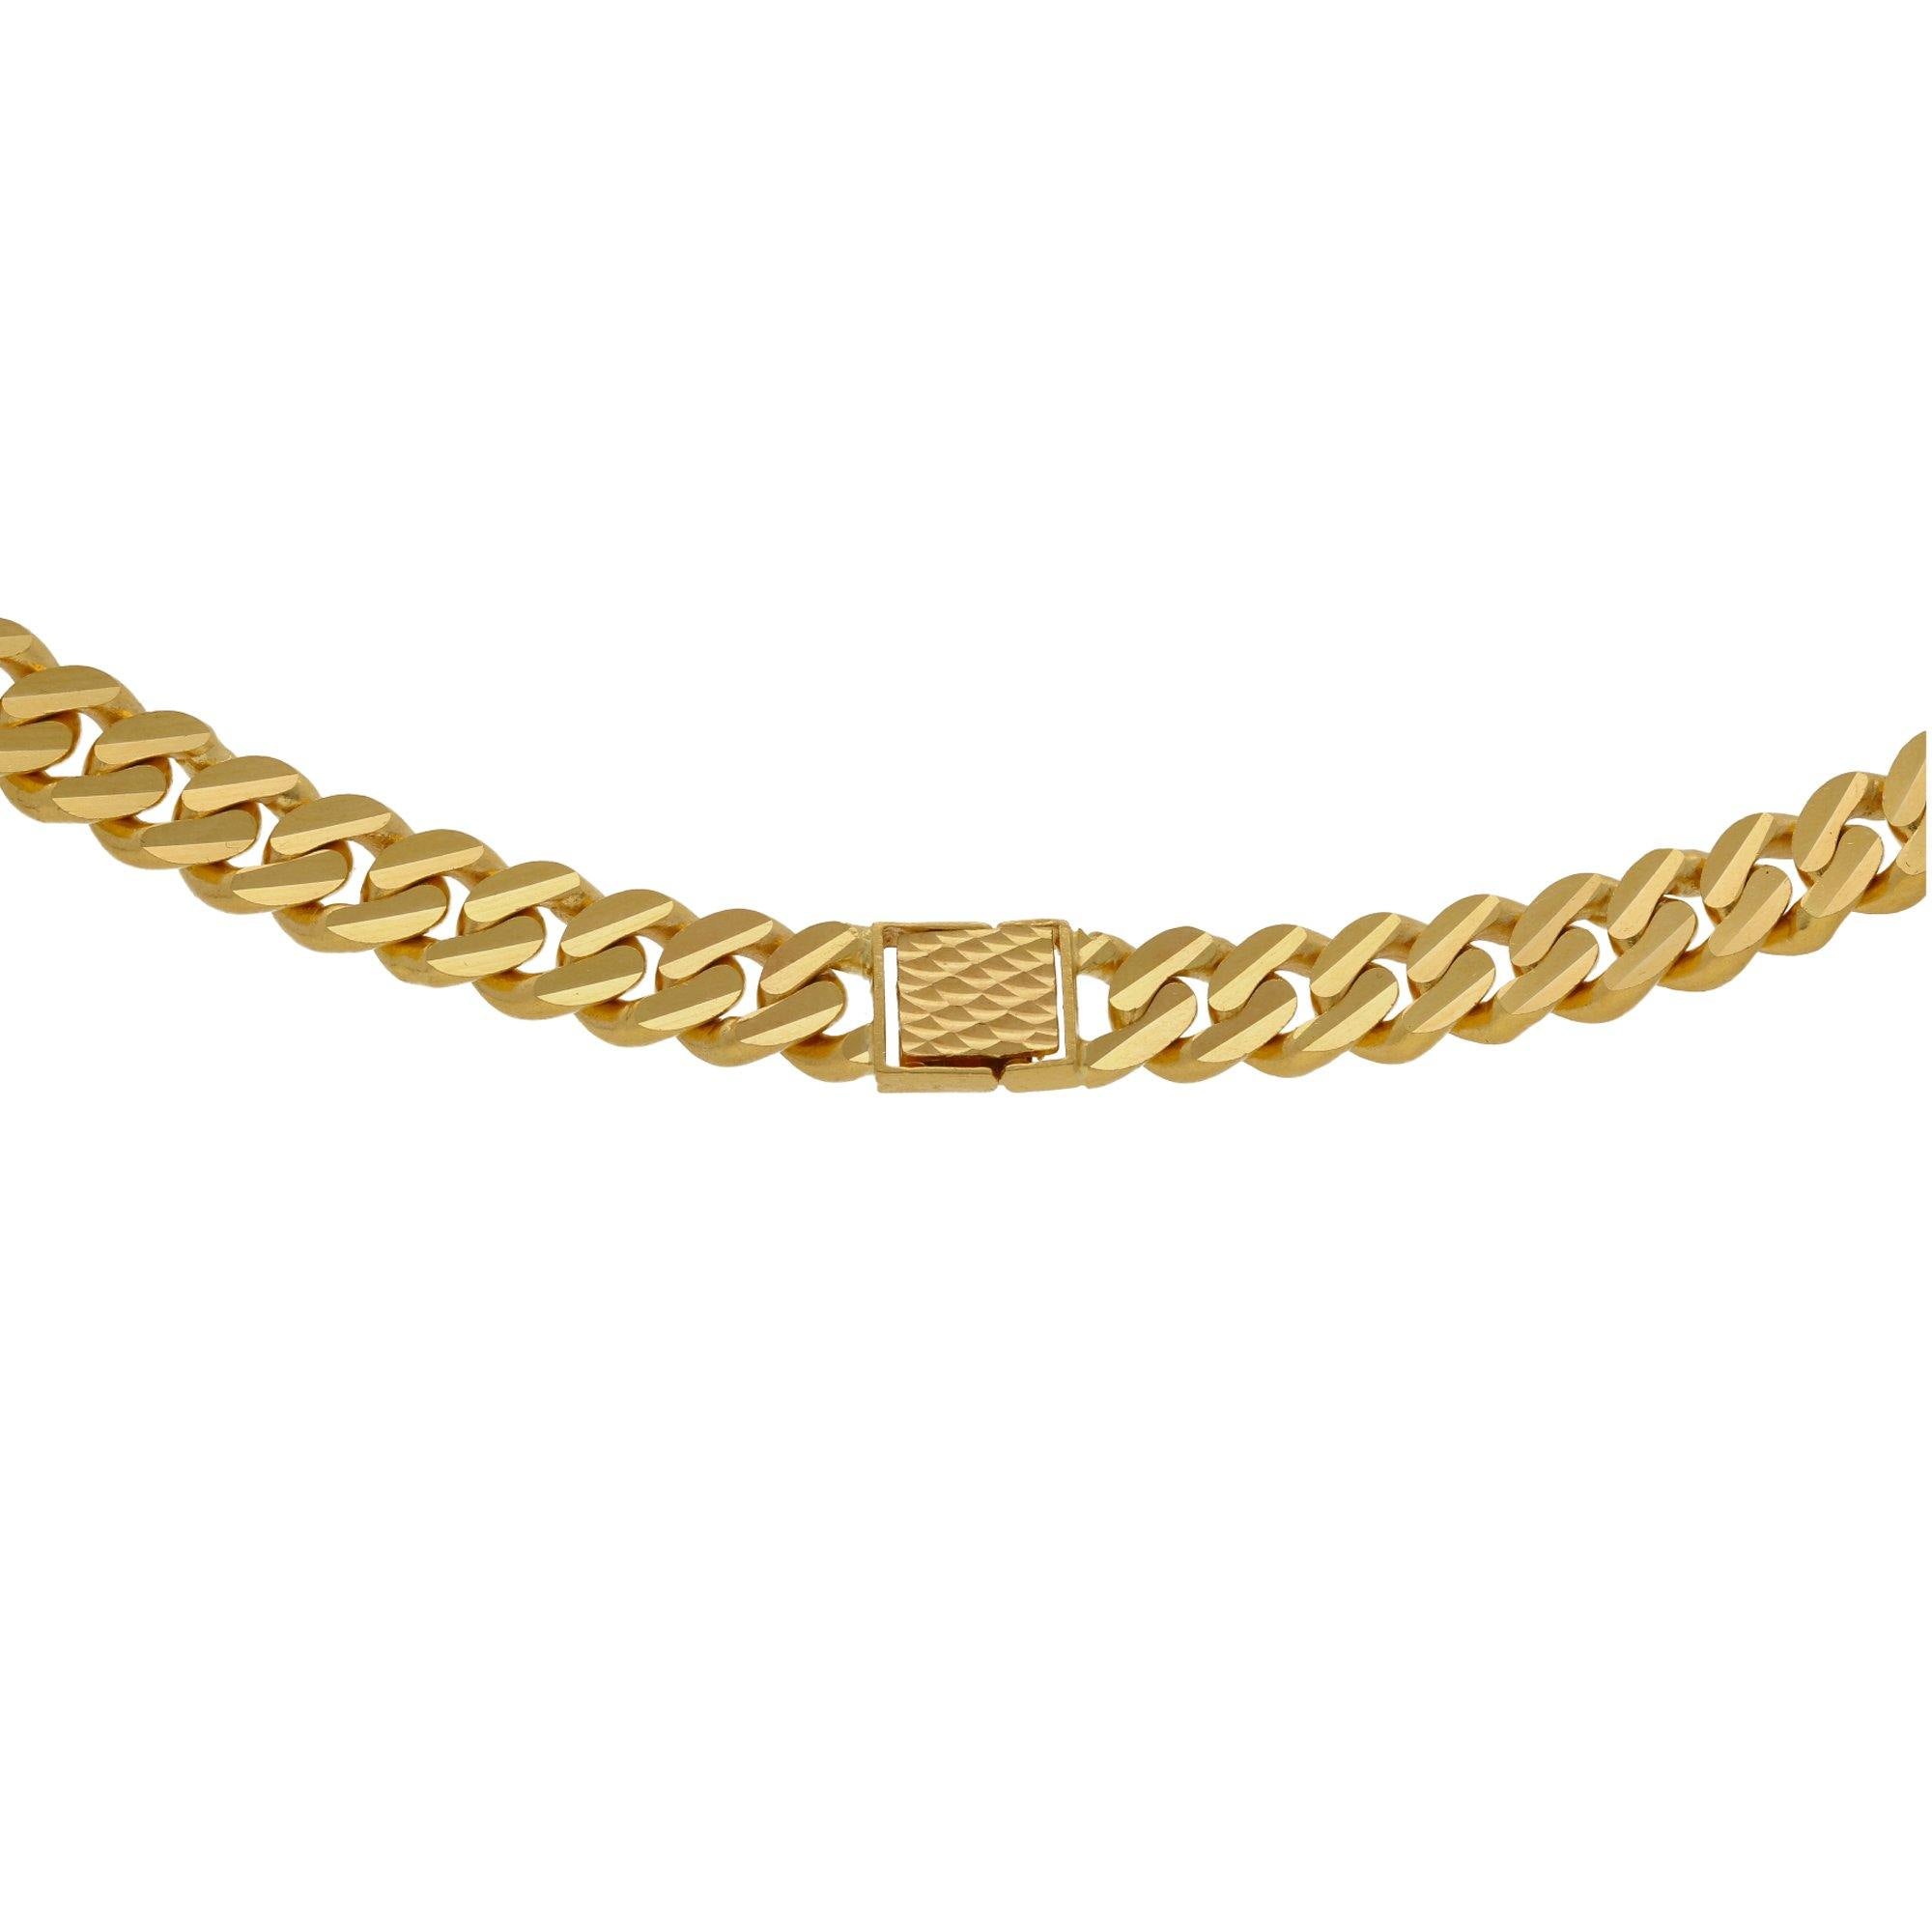 22K Yellow Gold Cuban Chain, Length 24 inches